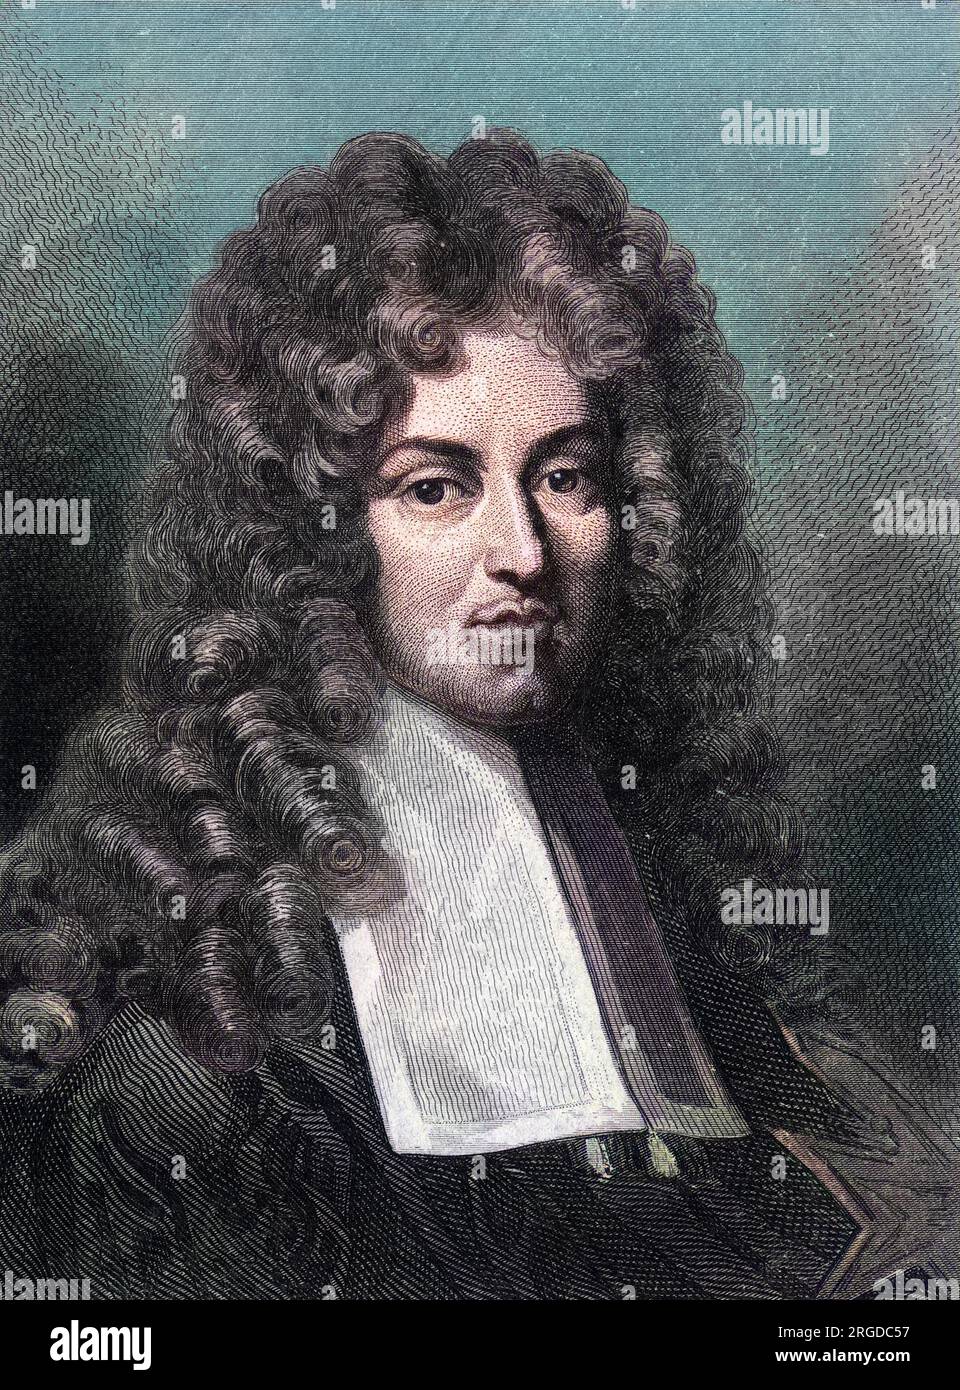 JEAN-BAPTISTE COLBERT, marquis de SEIGNELAY French statesman, son of the minister Colbert. Stock Photo